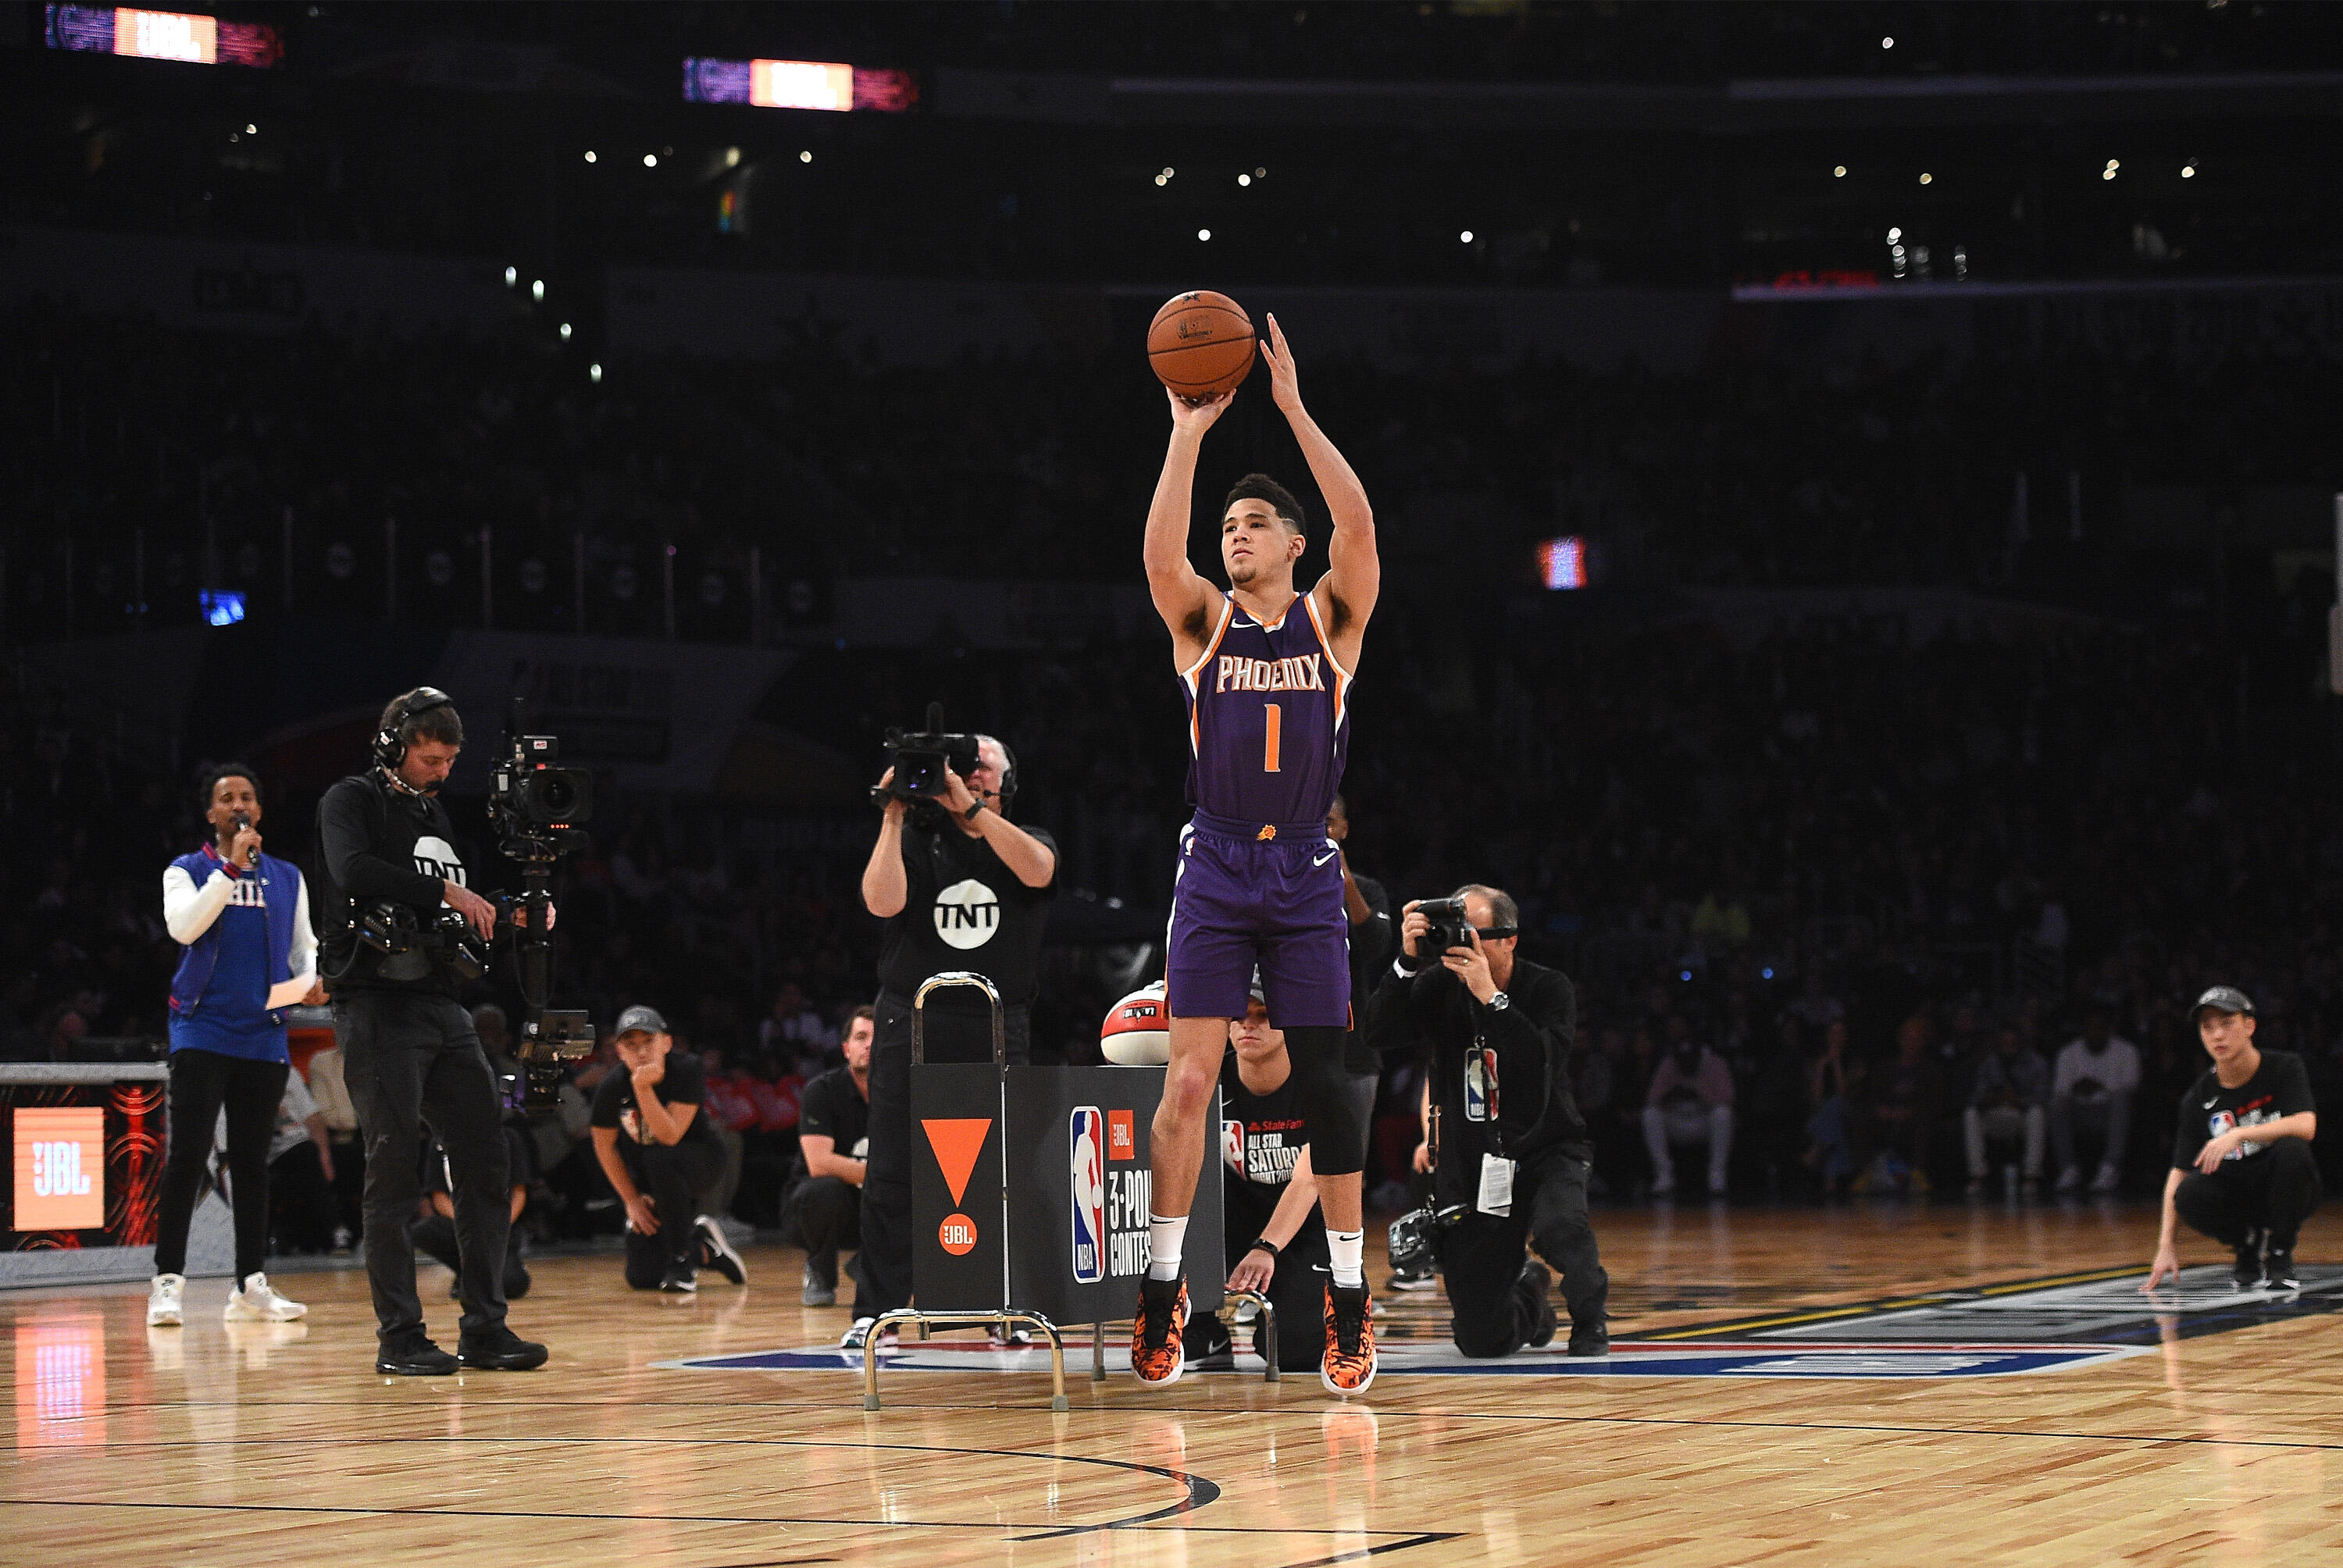 NBA 3-point contest: Devin Booker's record night upstages Klay Thompson  return home – East Bay Times